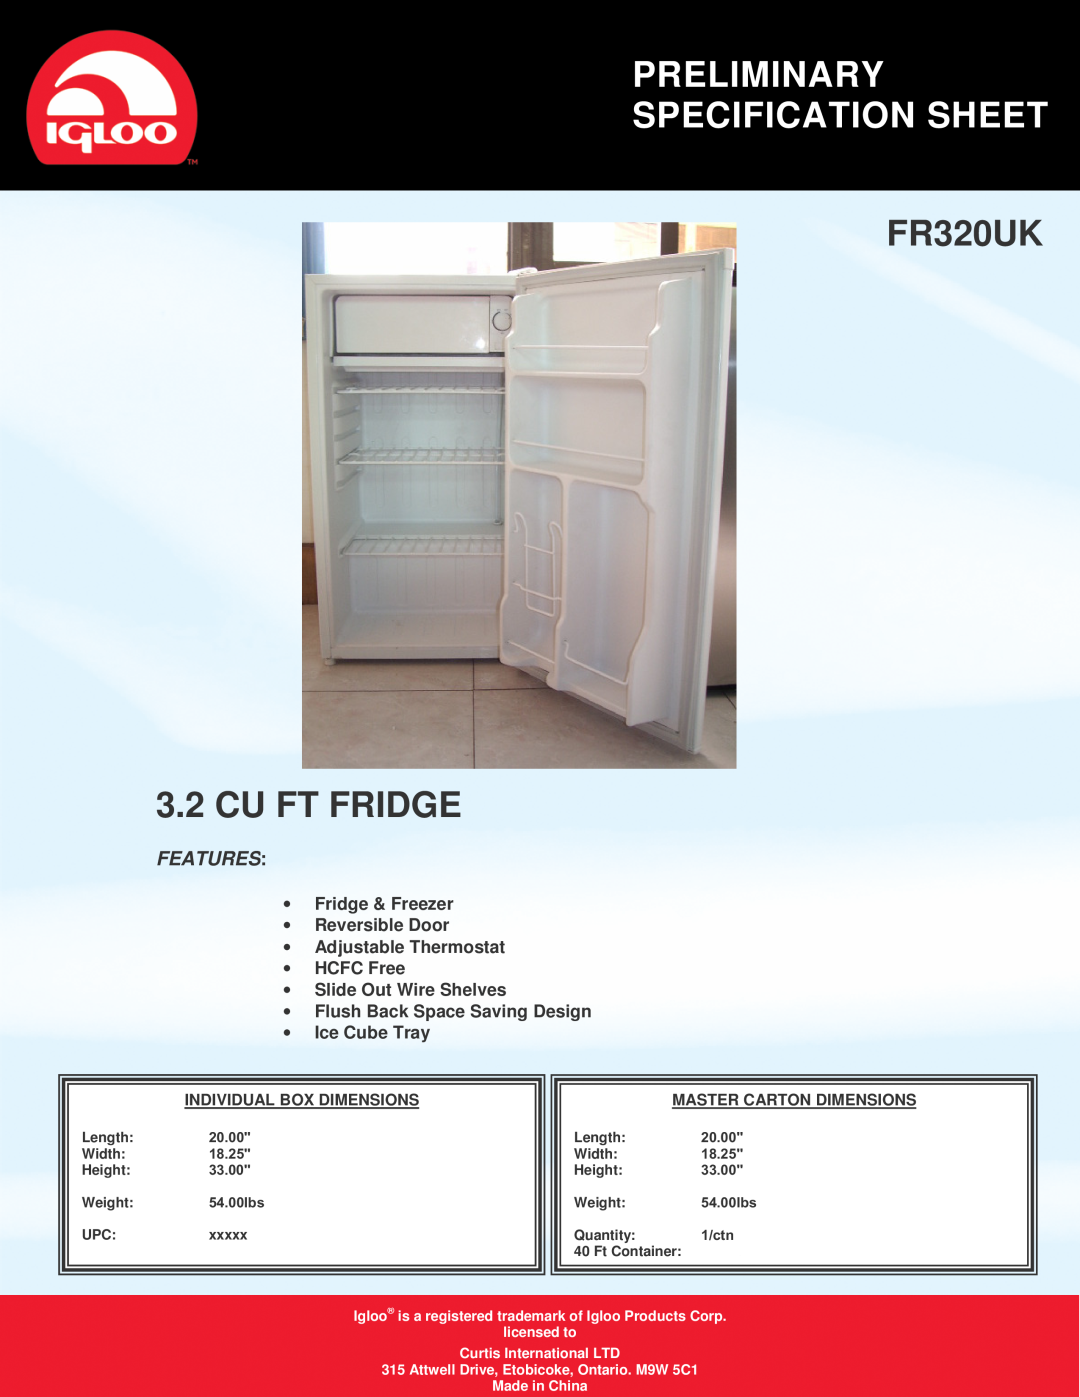 Curtis specifications Preliminary Specification Sheet, FR320UK 3.2 CU FT FRIDGE, Features, Slide Out Wire Shelves 